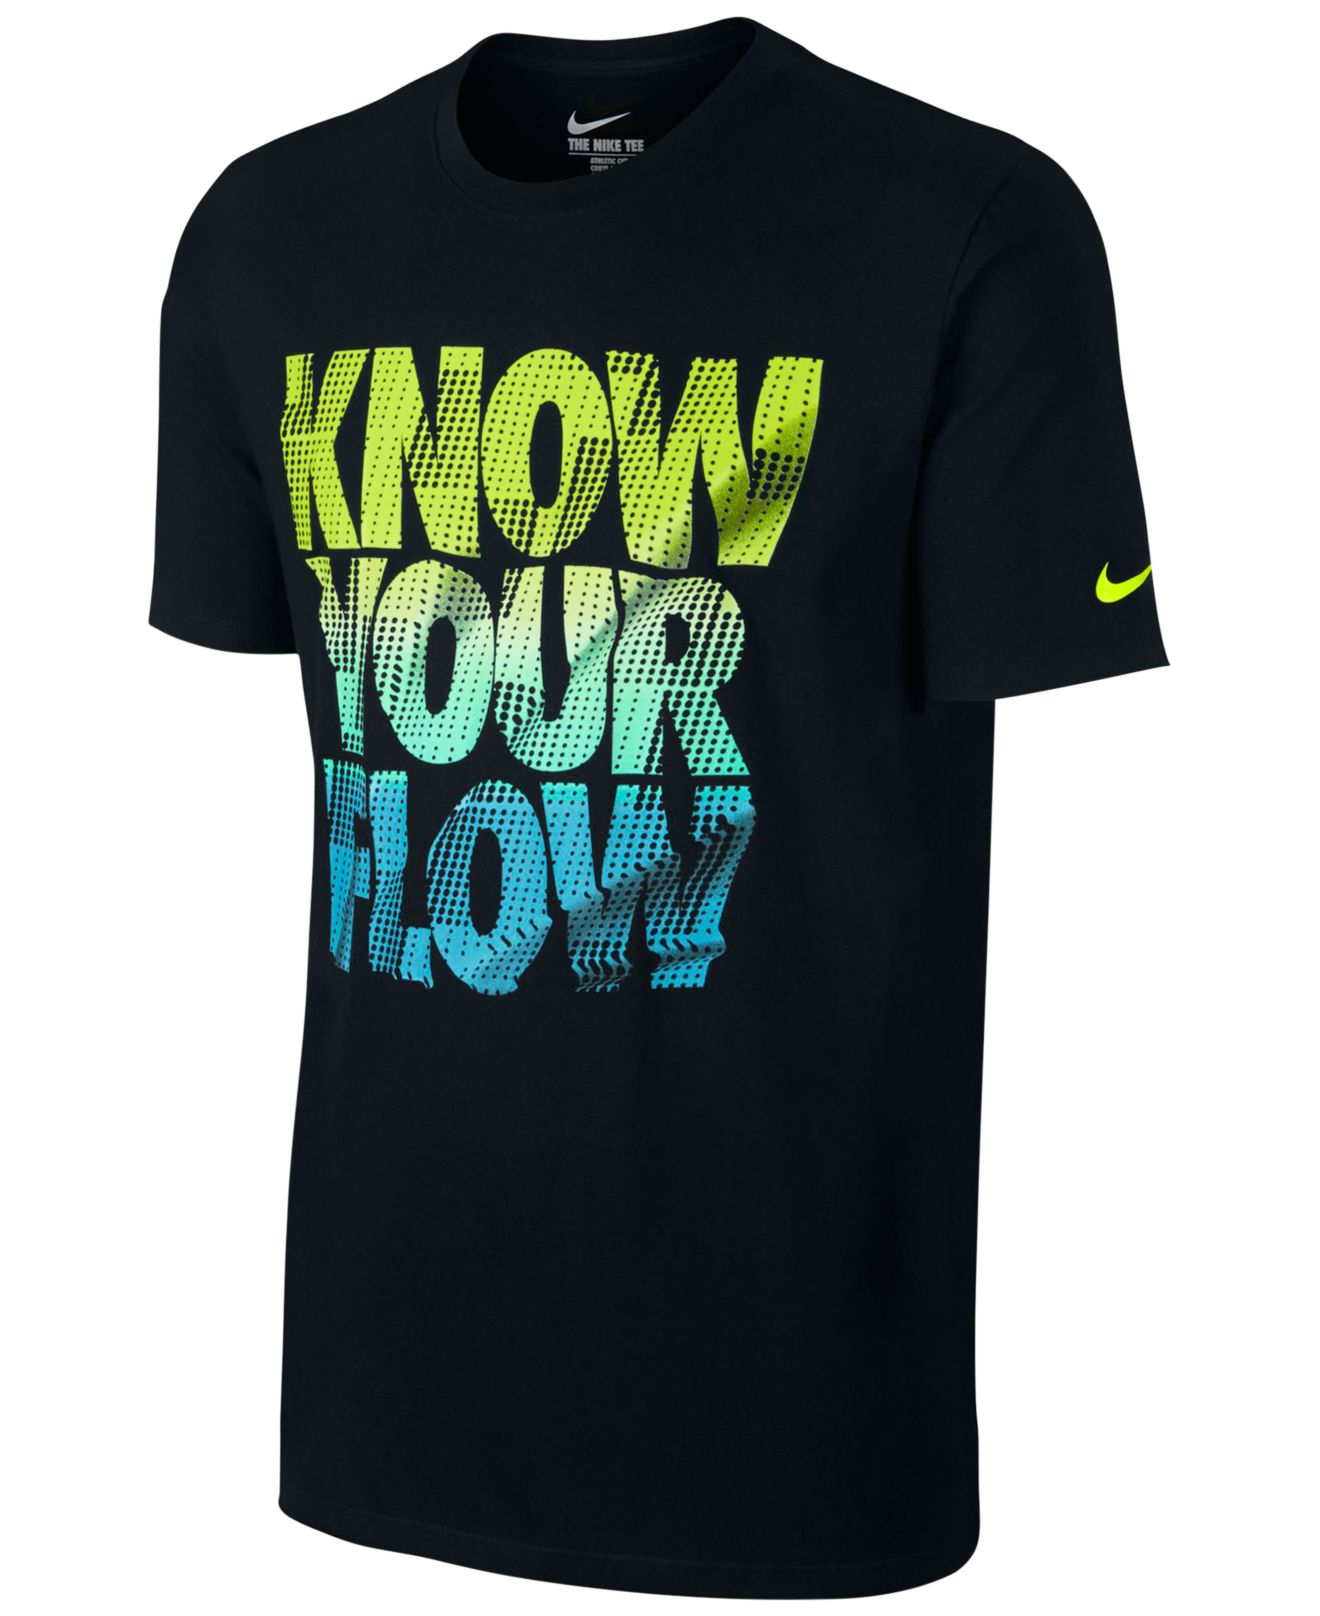 Nike Cotton Men's Know Your Flow Graphic T-shirt in Black for Men - Lyst